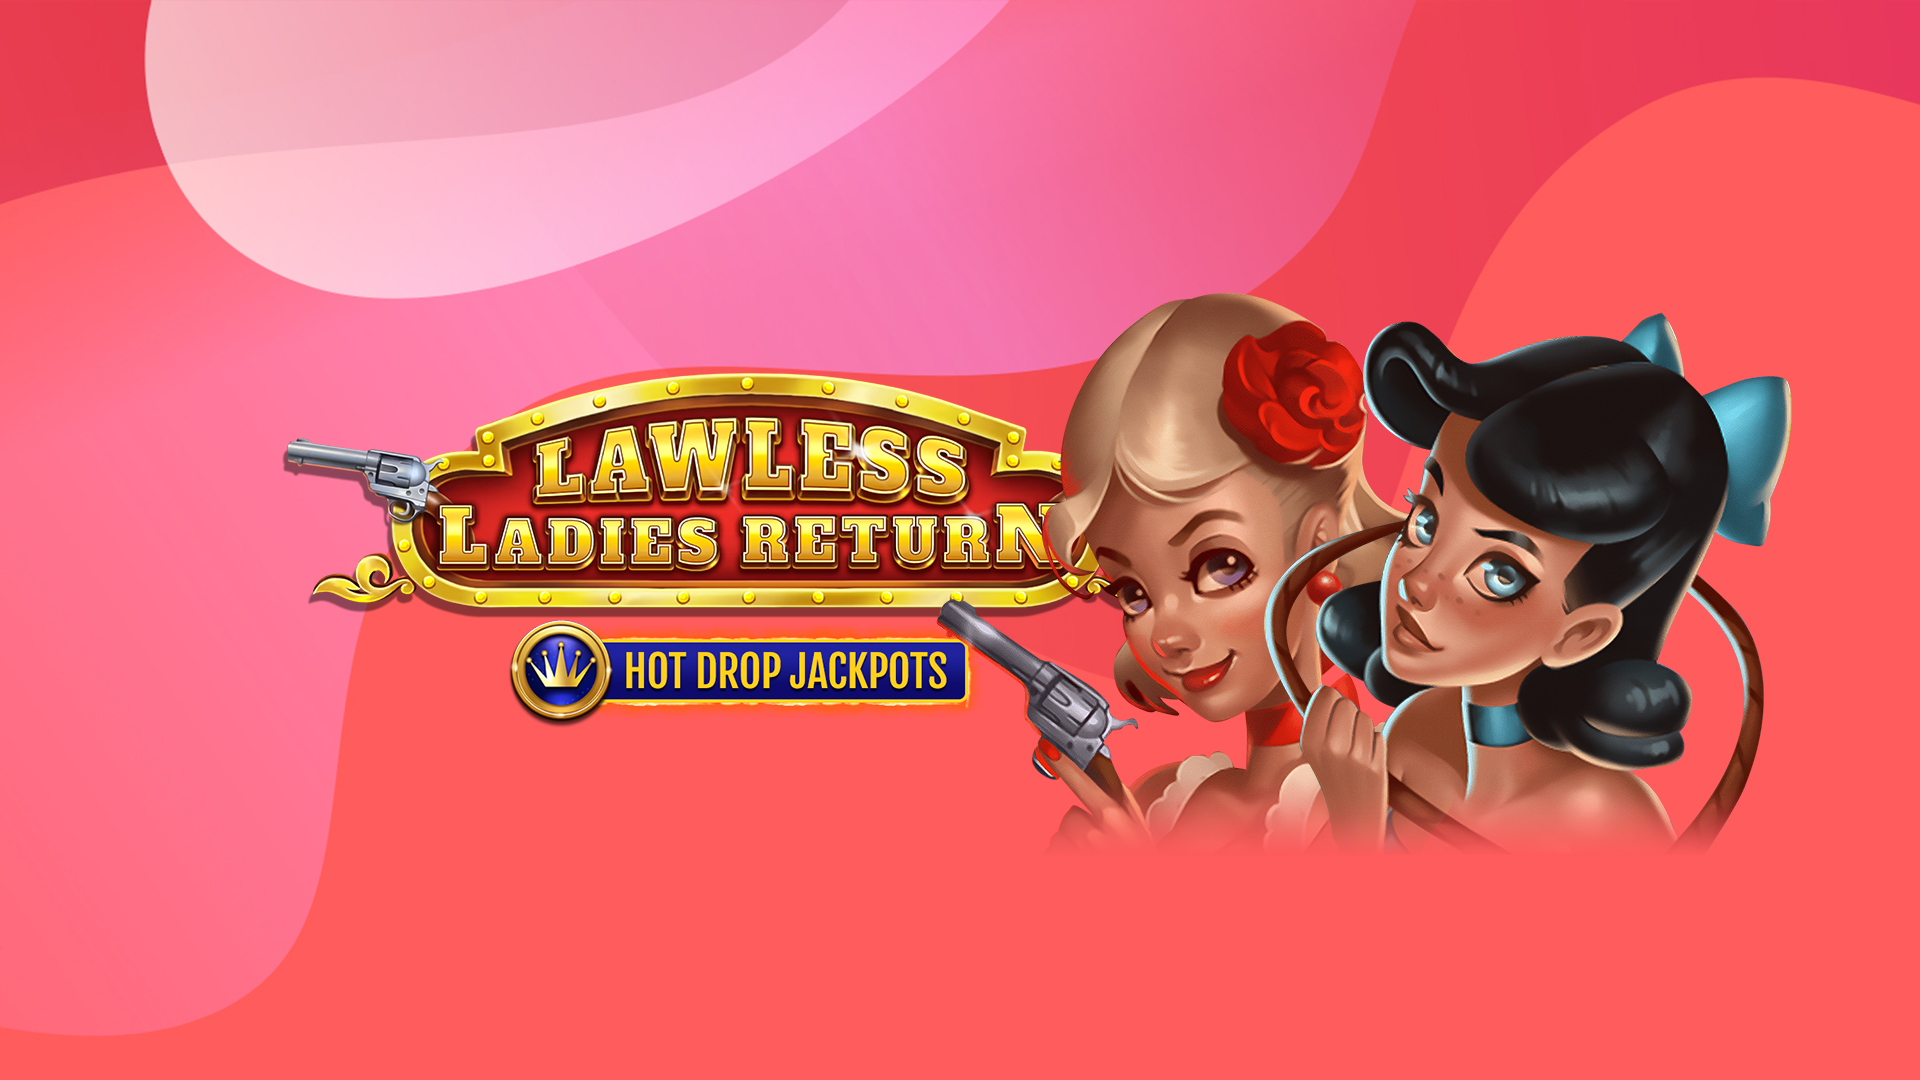 A blond lady with a shot gun is next to a black-haired lady with a lasso, and on the left is a sign with text saying ‘Lawless Ladies Return Hot Drop Jackpots’